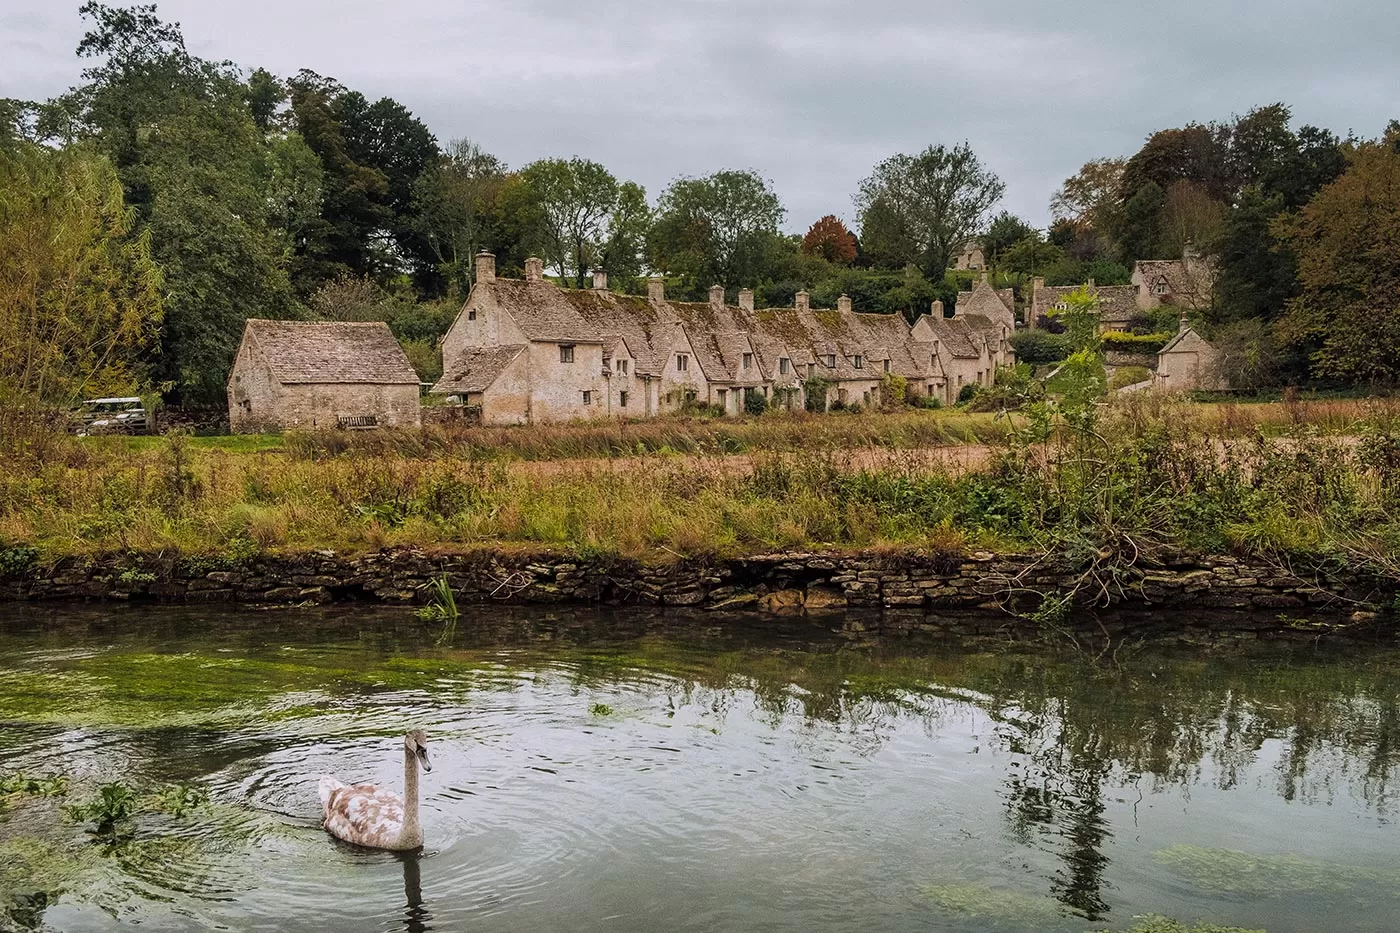 Cotswolds Best Villages - Bibury - Arlington Row cottages and swan in stream